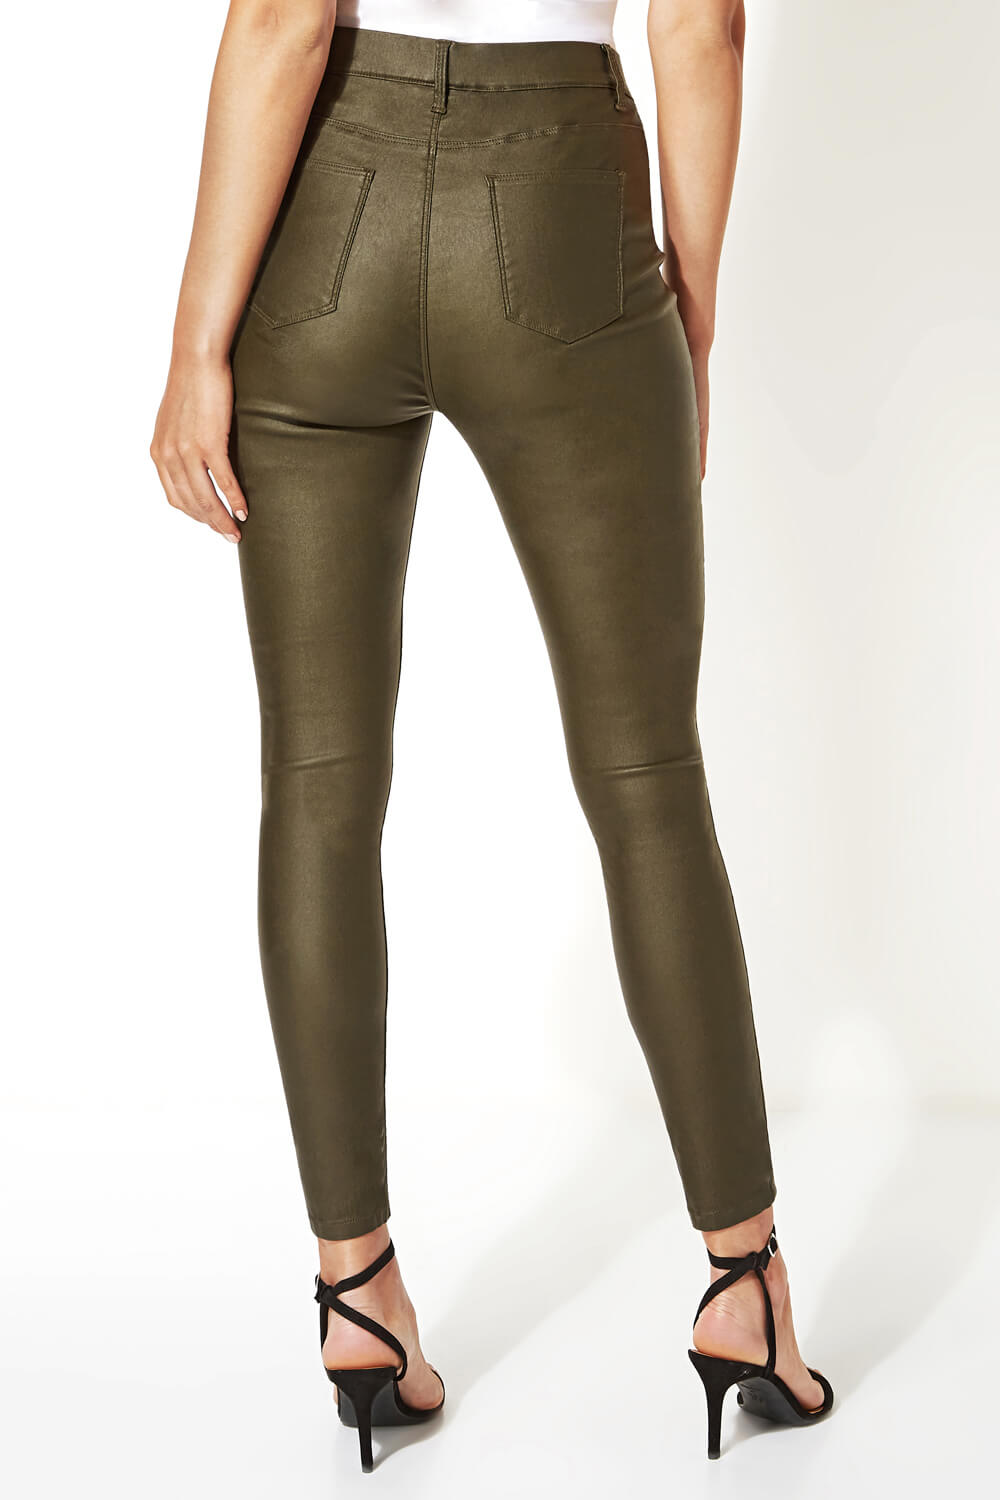 KHAKI Faux Leather Trousers, Image 2 of 5